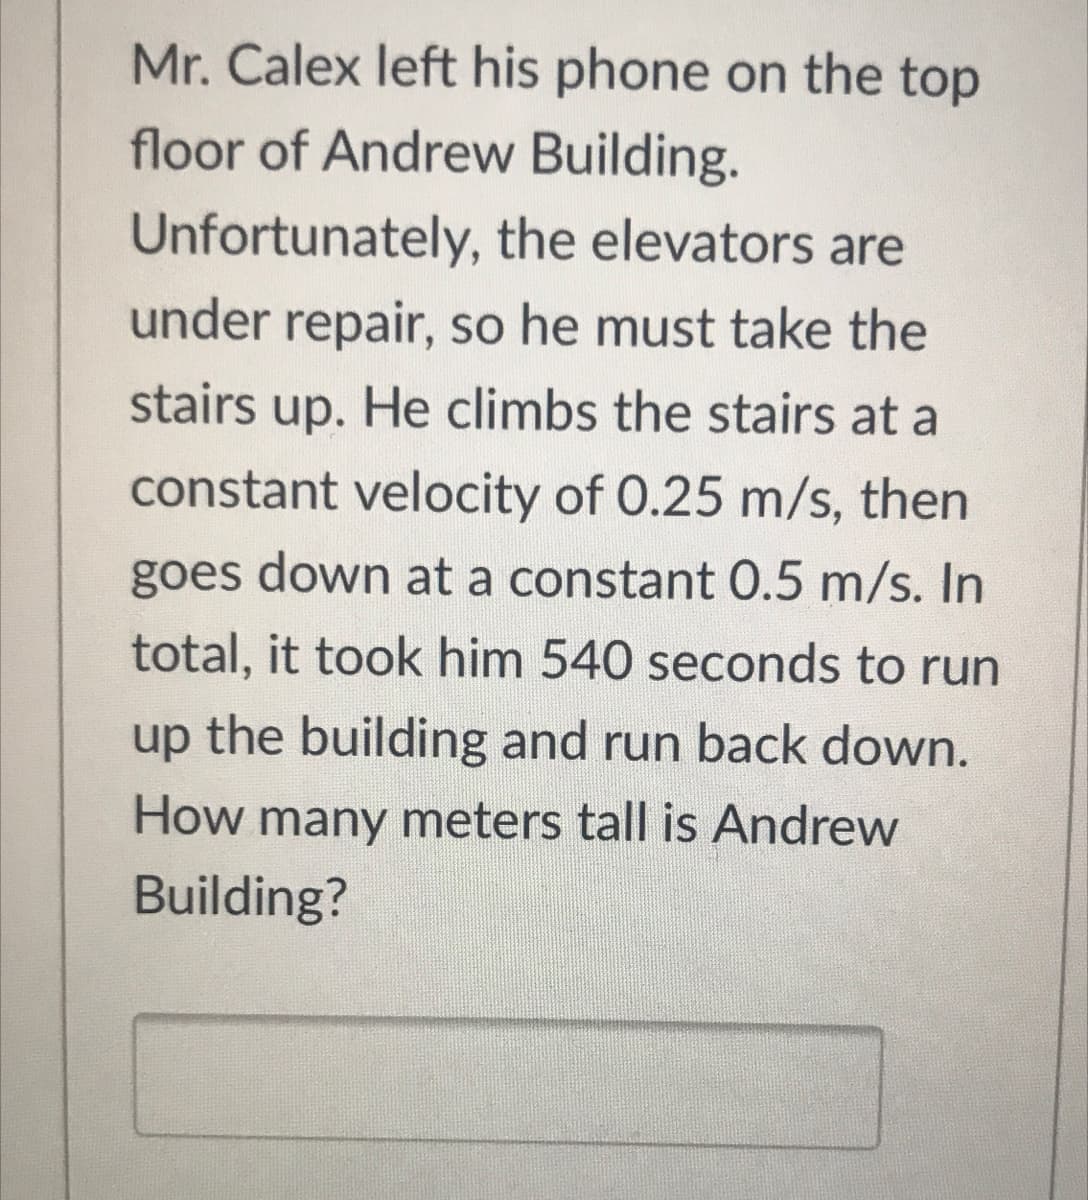 Mr. Calex left his phone on the top
floor of Andrew Building.
Unfortunately, the elevators are
under repair, so he must take the
stairs up. He climbs the stairs at a
constant velocity of 0.25 m/s, then
goes down at a constant O.5 m/s. In
total, it took him 540 seconds to run
up the building and run back down.
How many meters tall is Andrew
Building?
